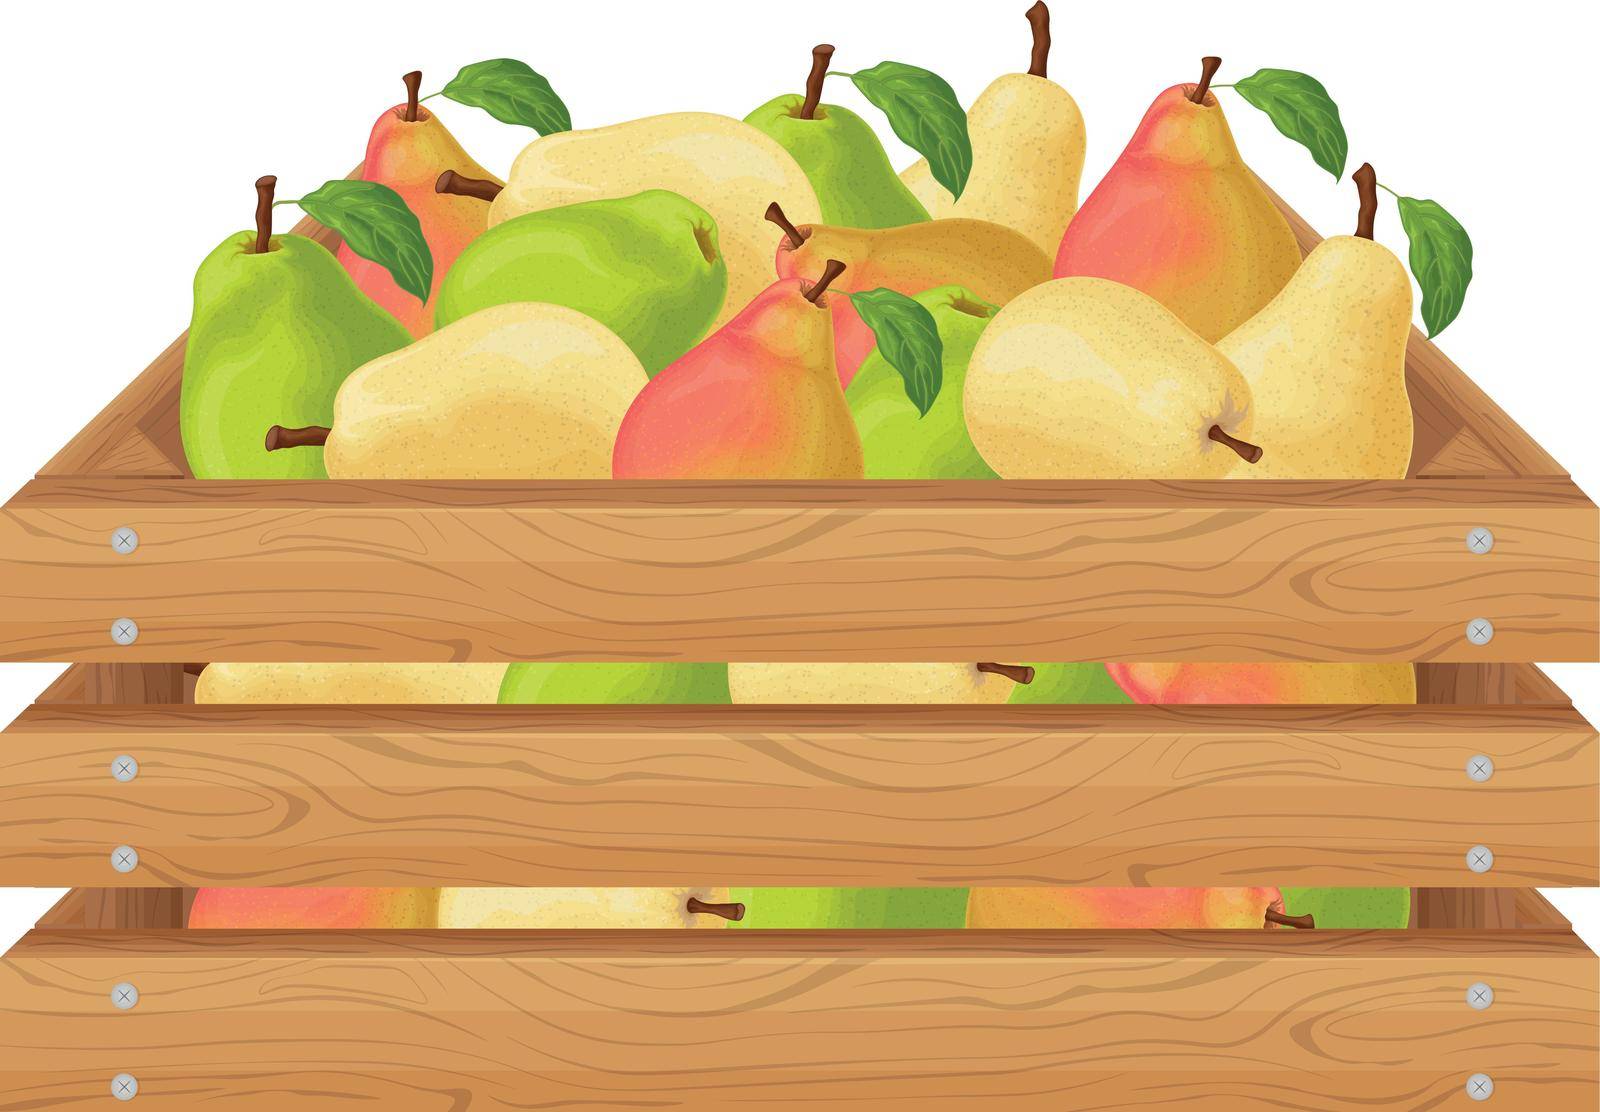 Pears. Wooden box with pears. Ripe pear fruits in a box. Fresh garden fruits. Juicy pears in a wooden box. Vector illustration isolated on a white background by NastyaN